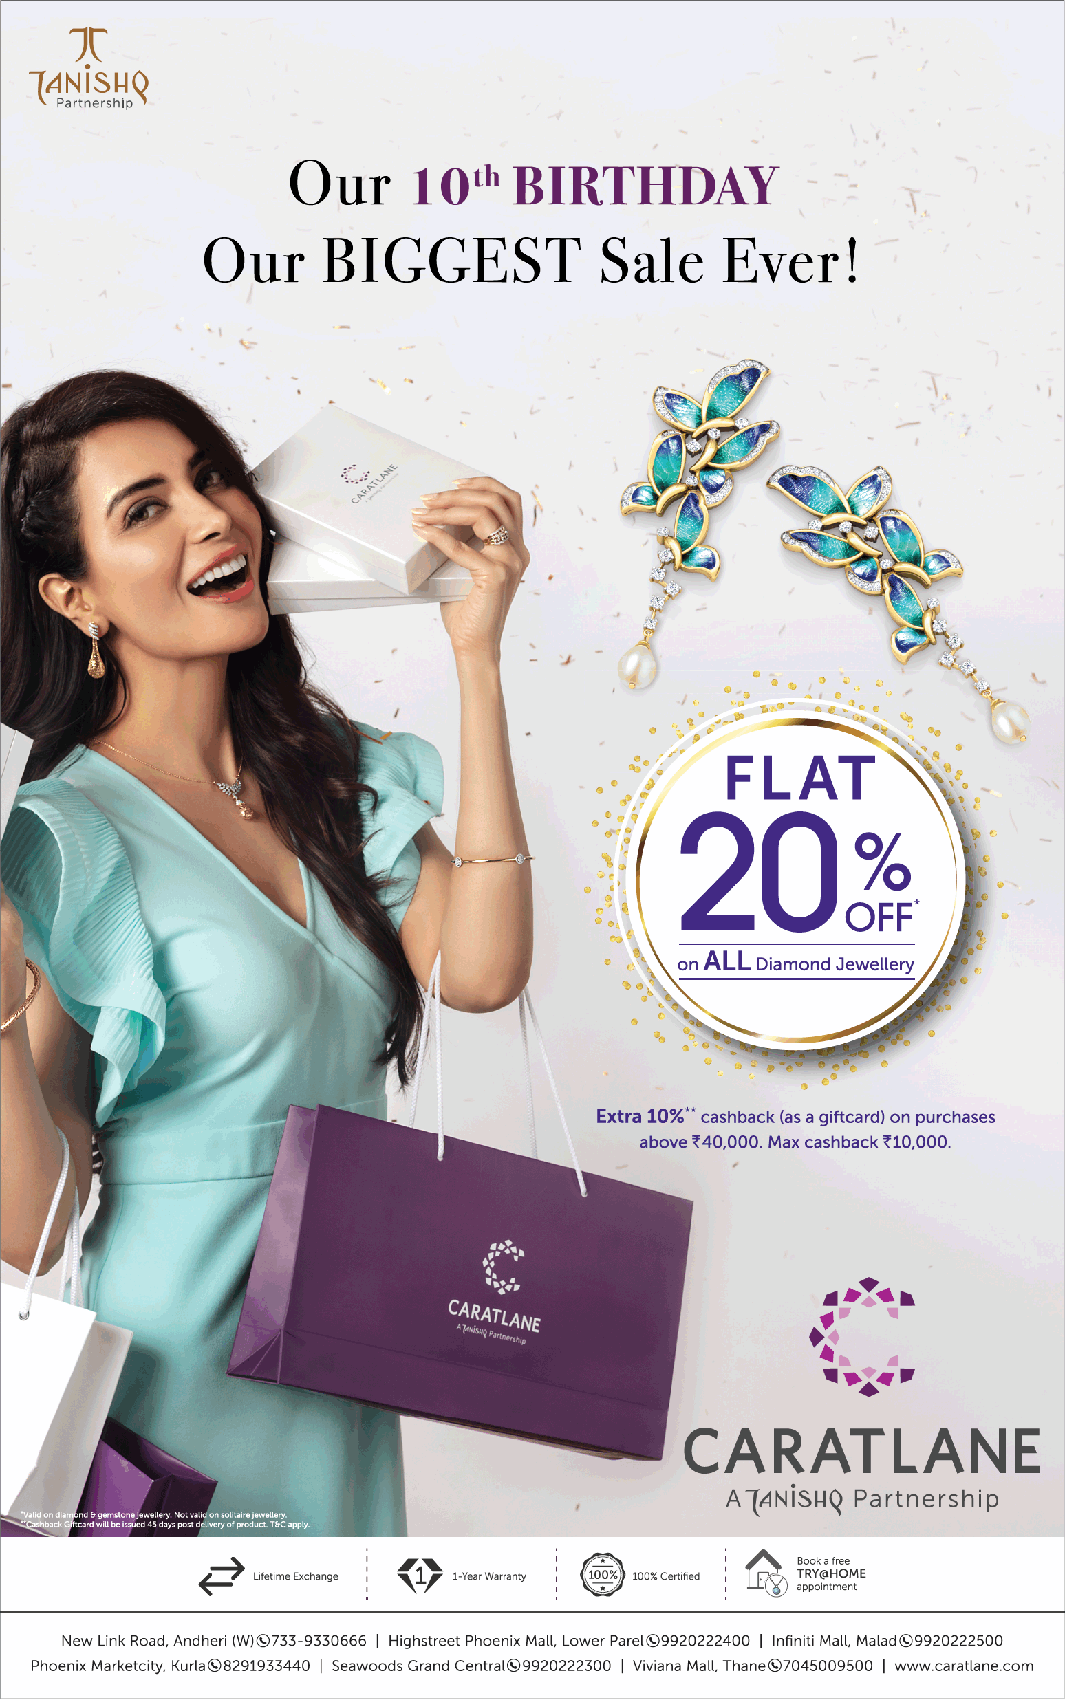 caratlane-our-10th-birthday-our-biggest-sale-ever-flat-20%-off-ad-bombay-times-23-02-2019.png